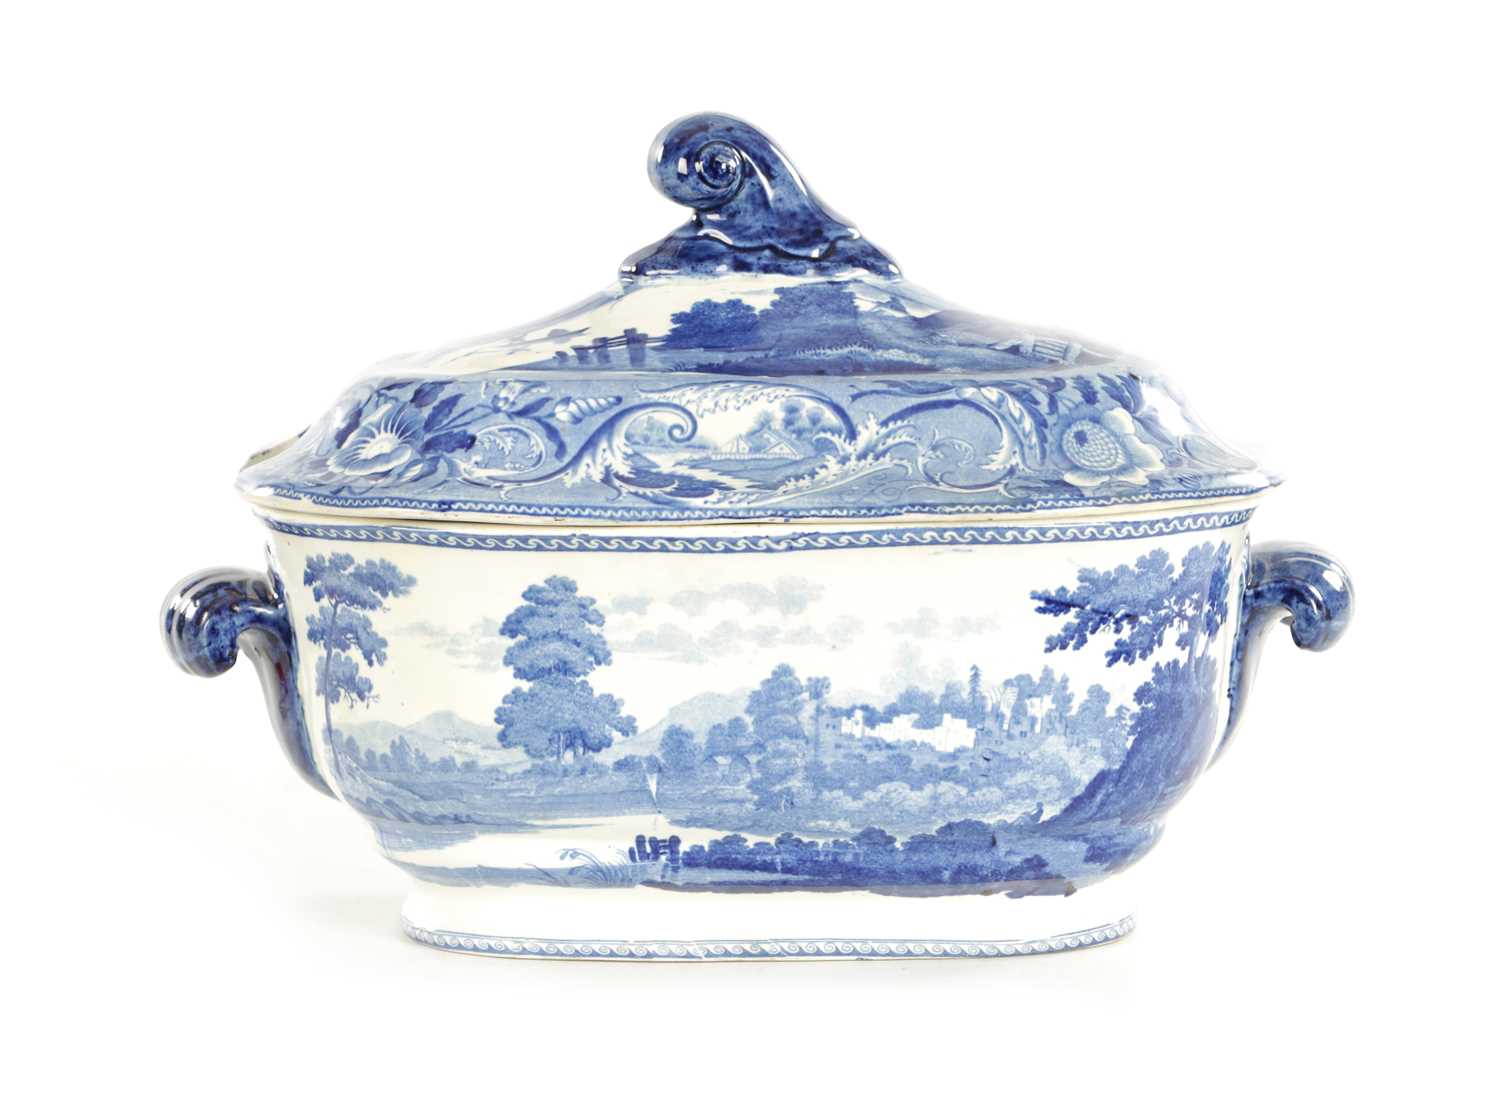 Lot 26 - AN EARLY 19TH CENTURY BLUE AND WHITE TRANSFER SOUP TUREEN